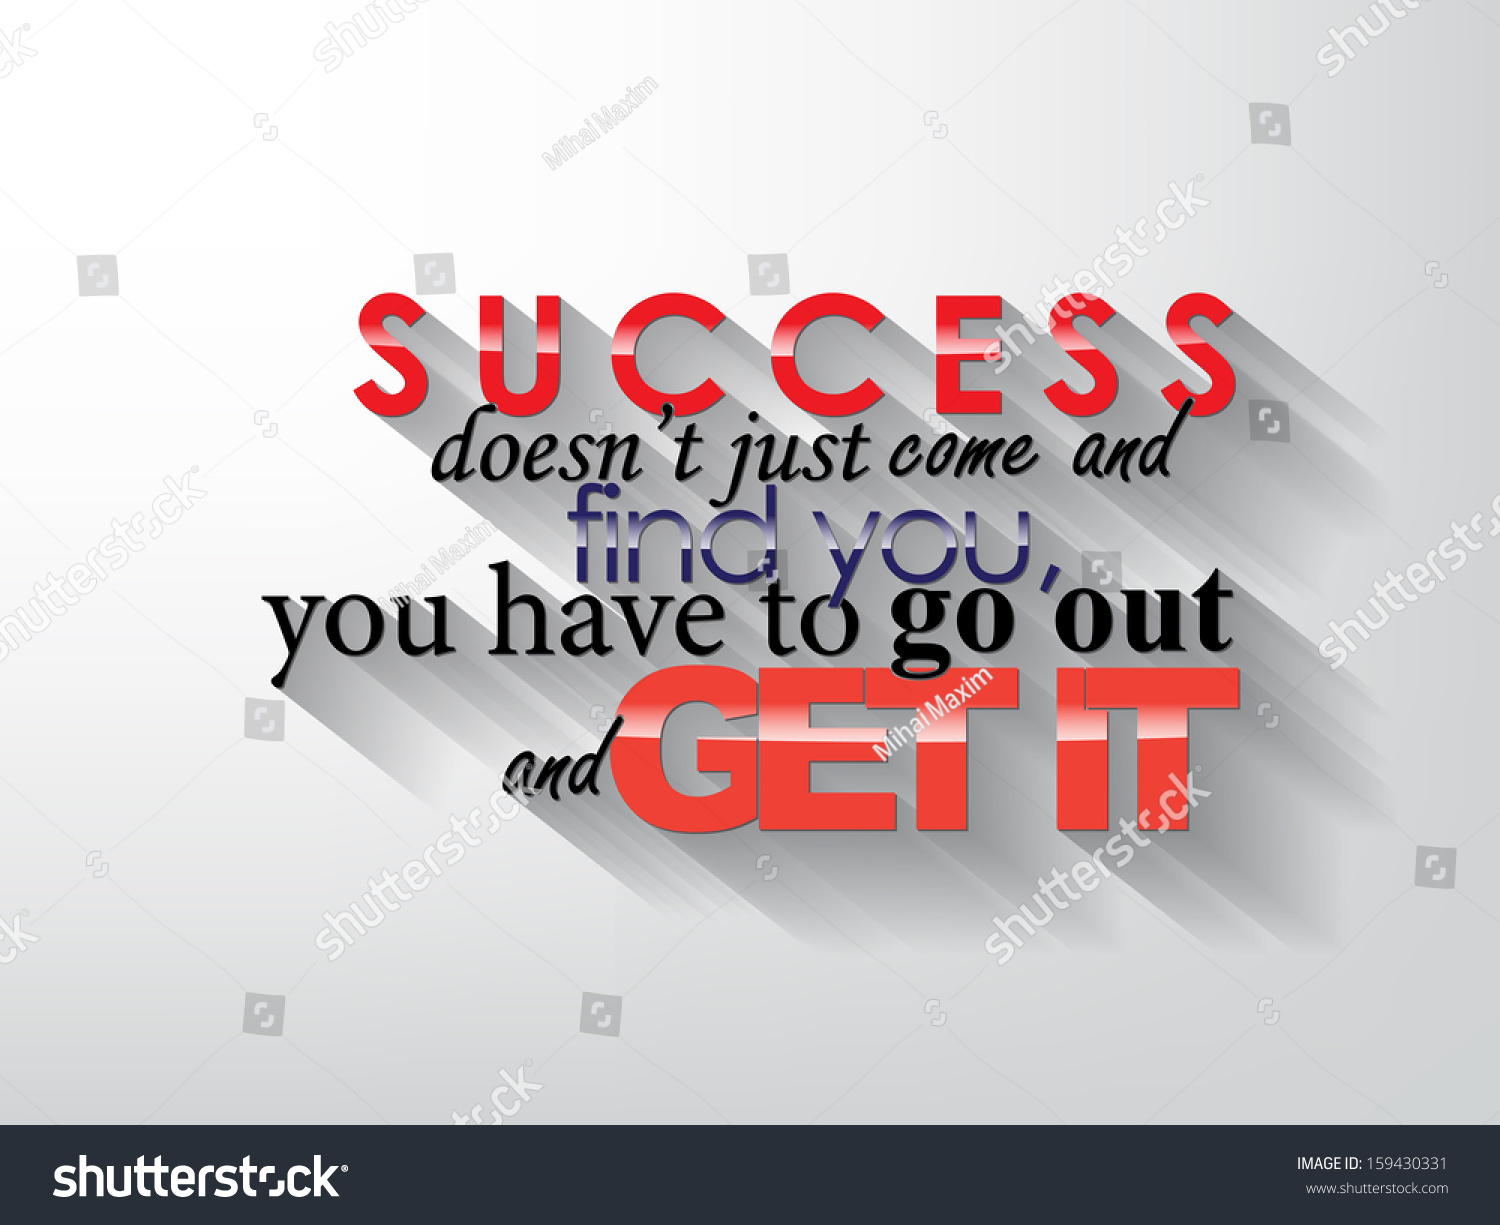 Success Doesn'T Just Came And Find You, You Have To Go Out And Get It